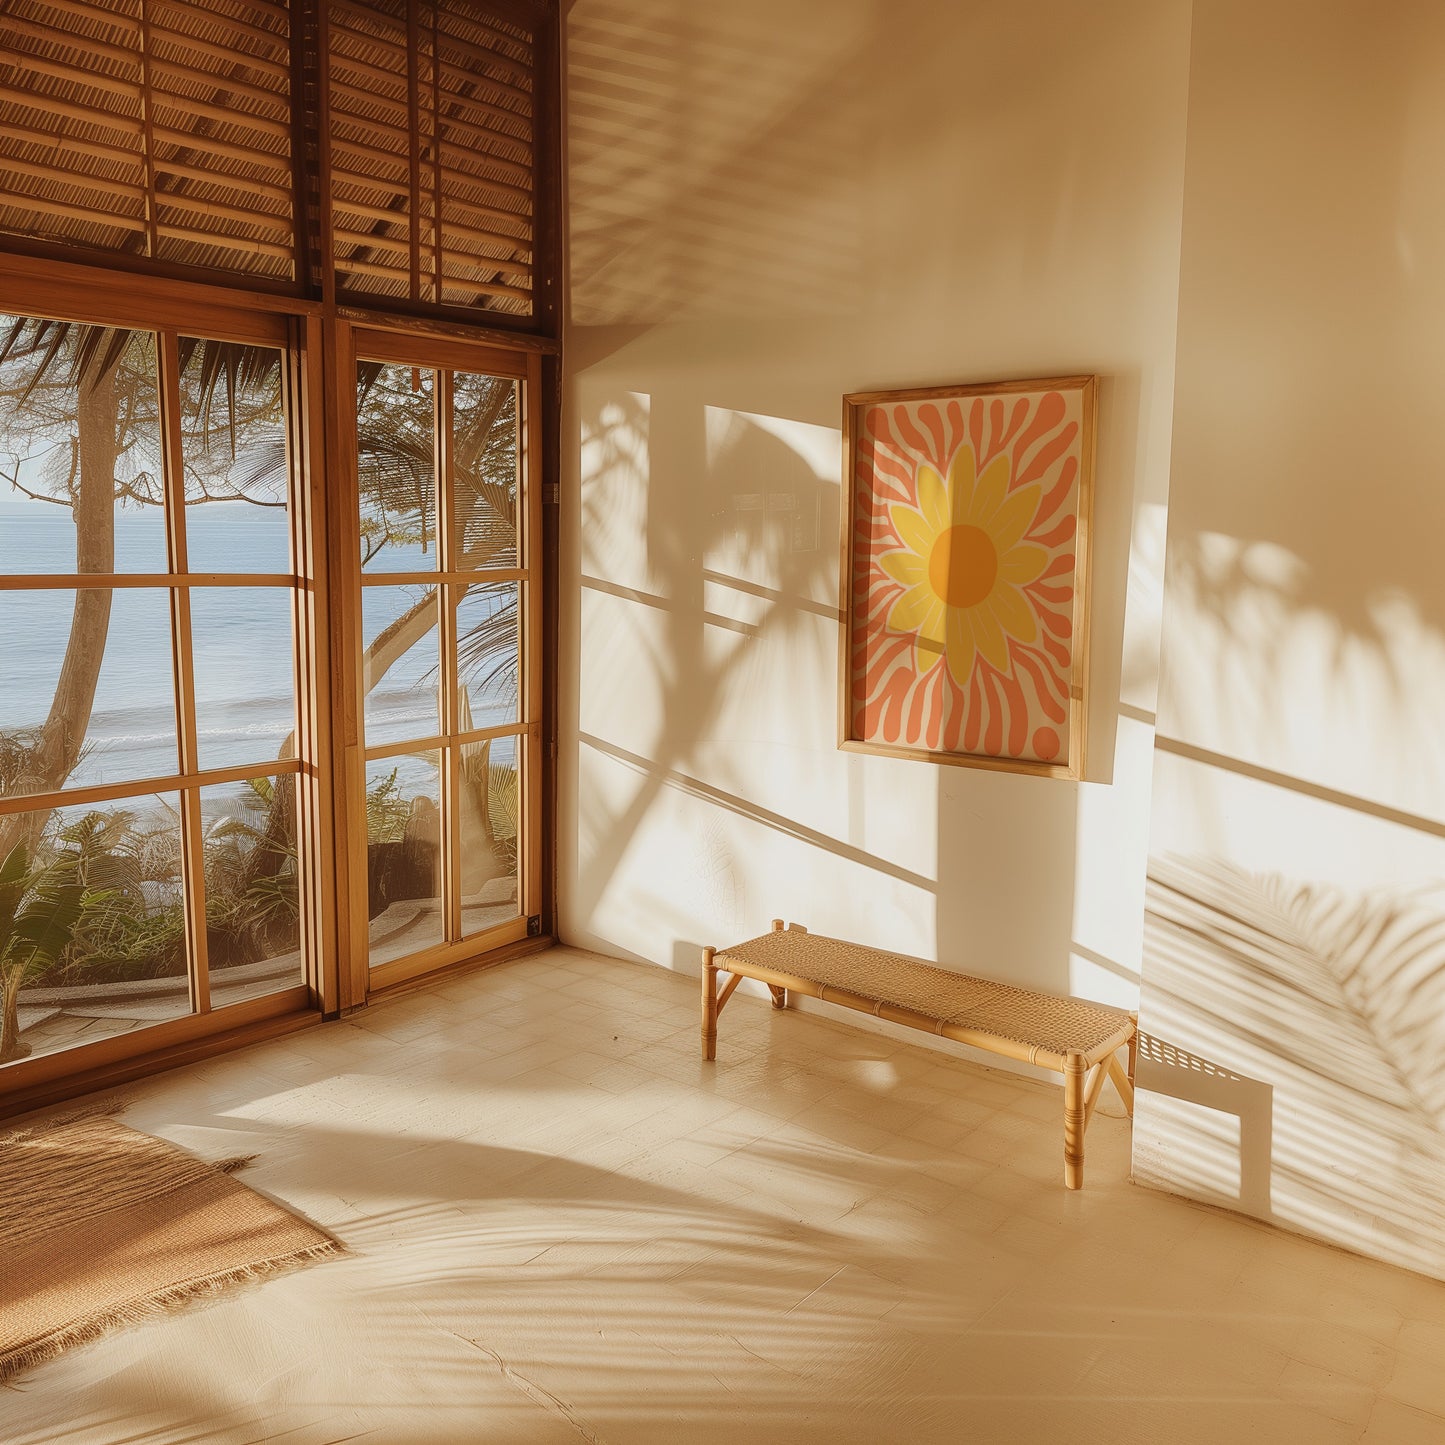 A sunlit room with a view of the sea through large windows, featuring a flower painting and a bench.